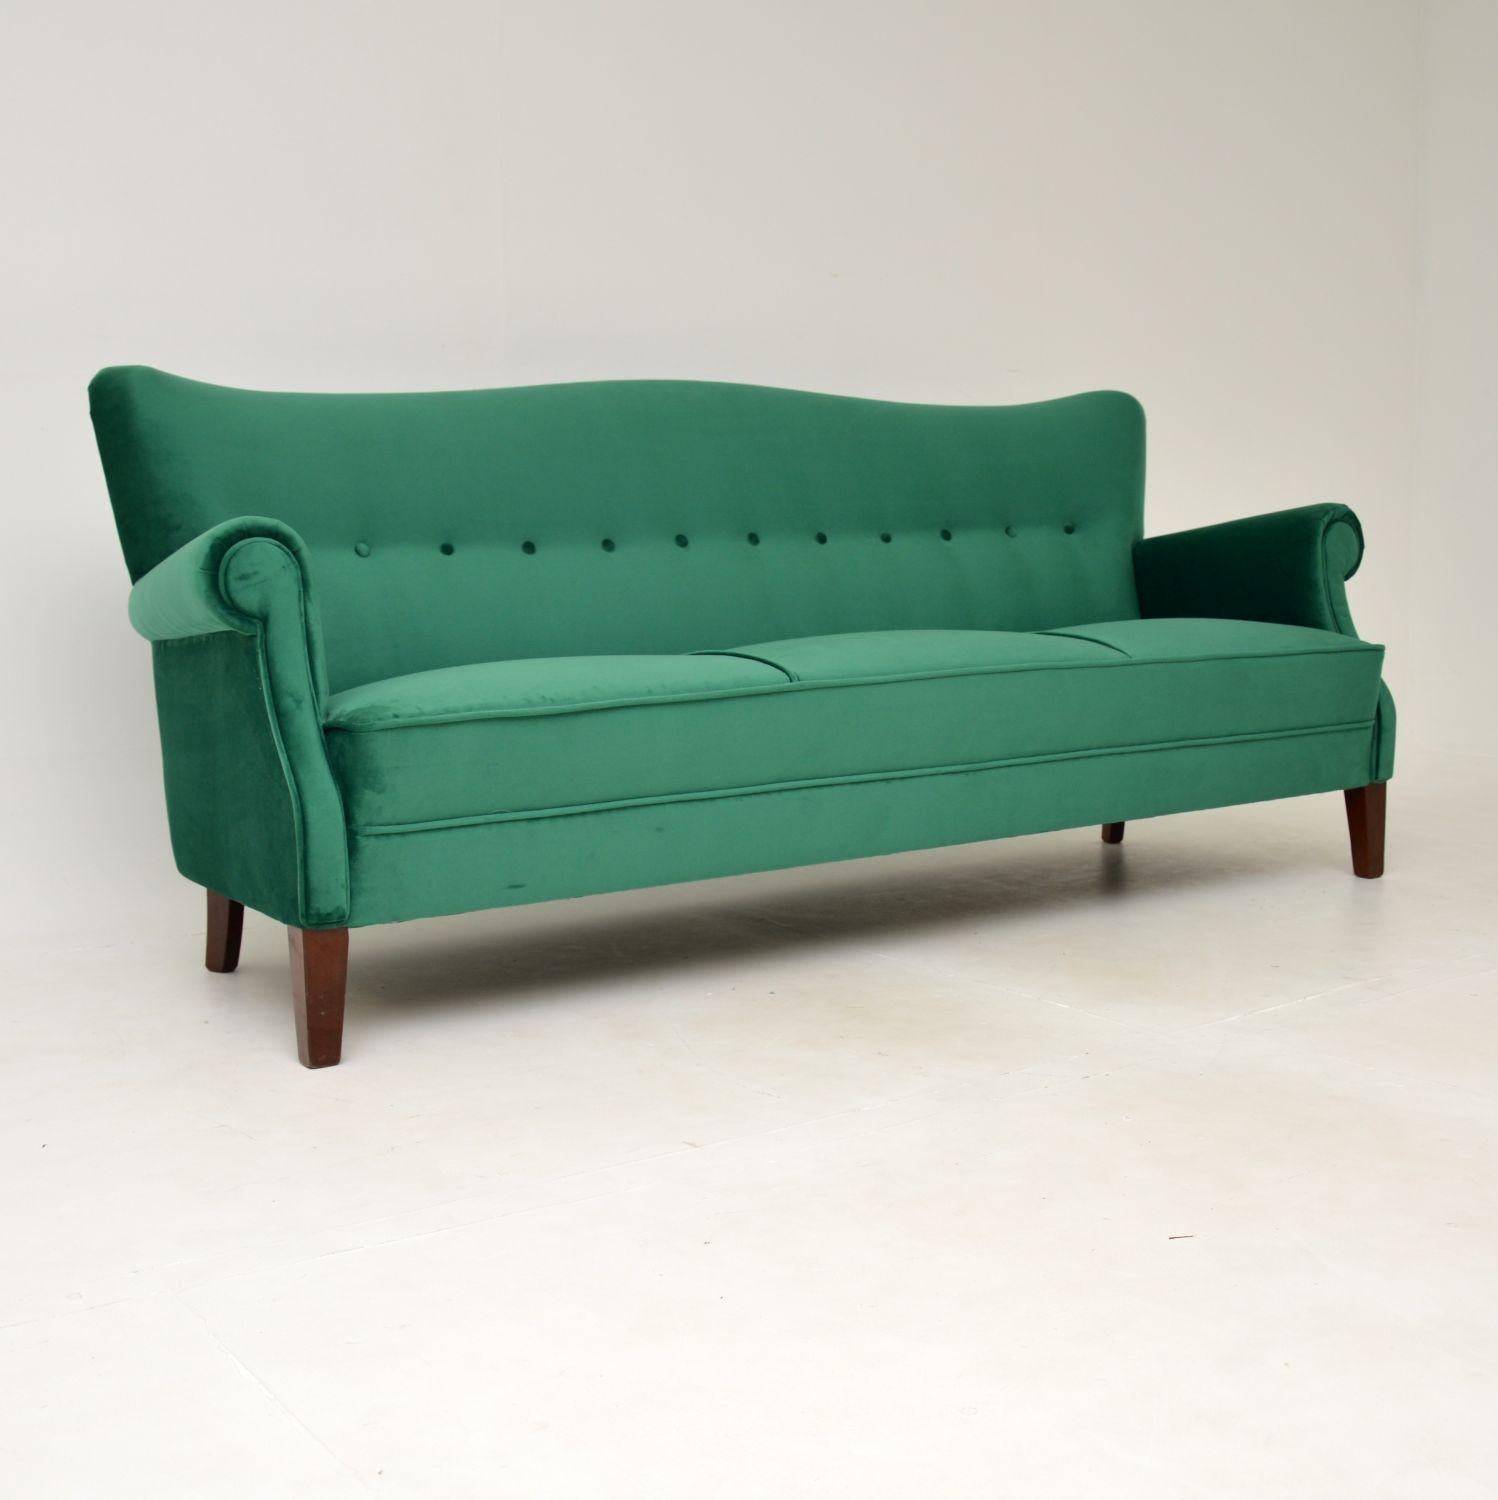 A stunning and very comfortable vintage Danish sofa. This was made in Denmark, it dates from around the 1940-1950’s.

The quality is amazing, this is extremely well built and sturdy. It is well sprung, well padded and very supportive. The design